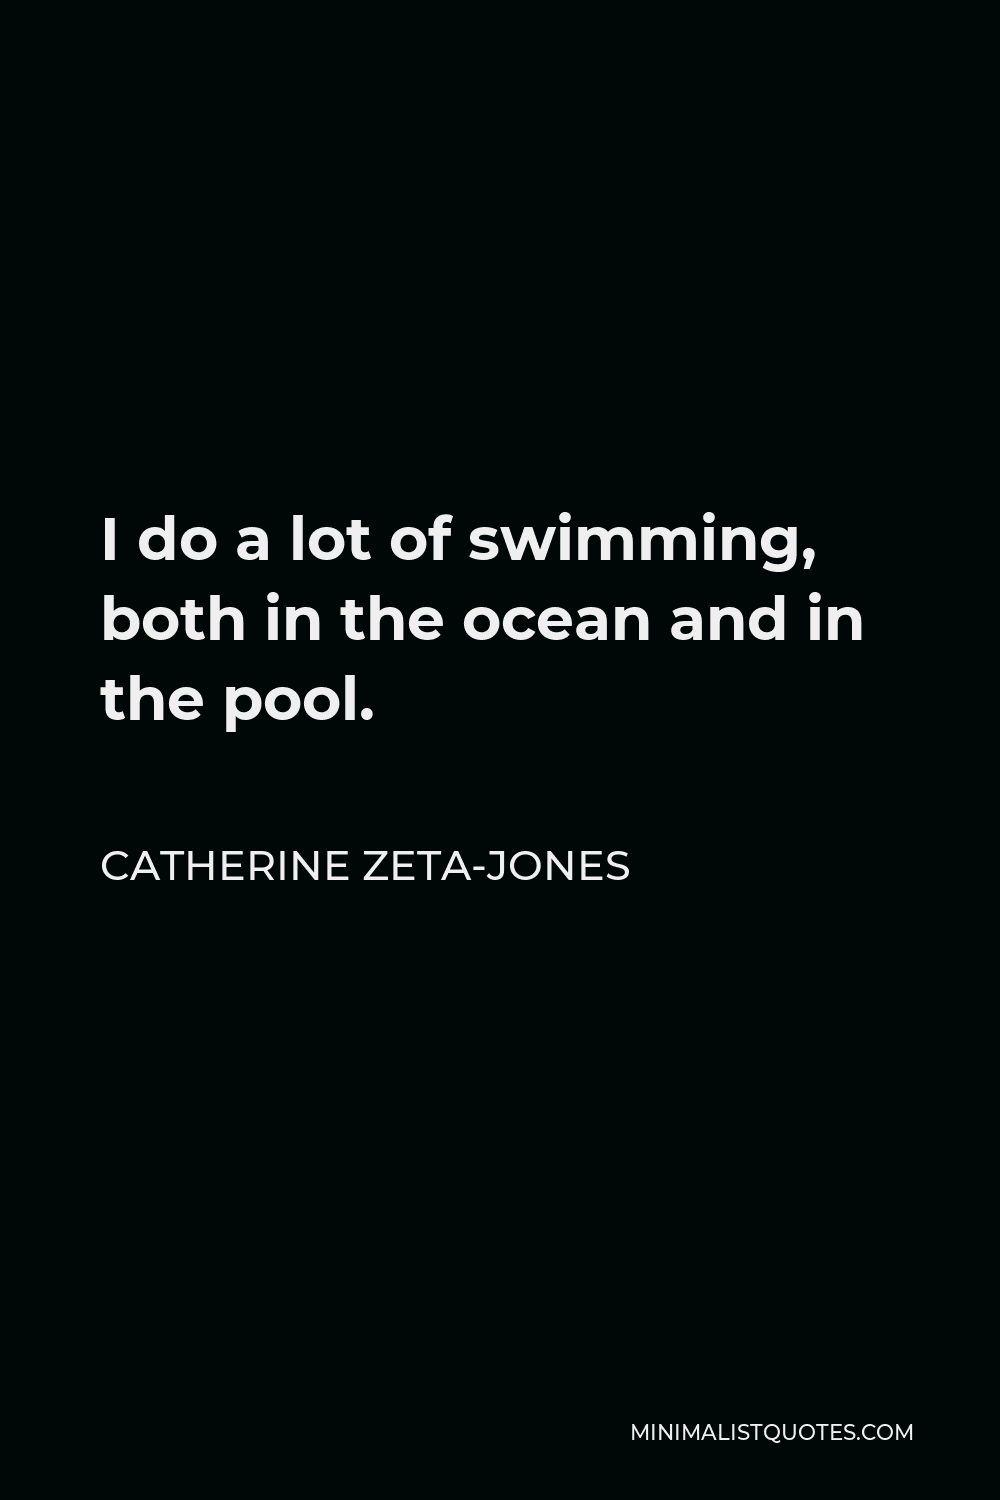 Catherine Zeta-Jones Quote - I do a lot of swimming, both in the ocean and in the pool.